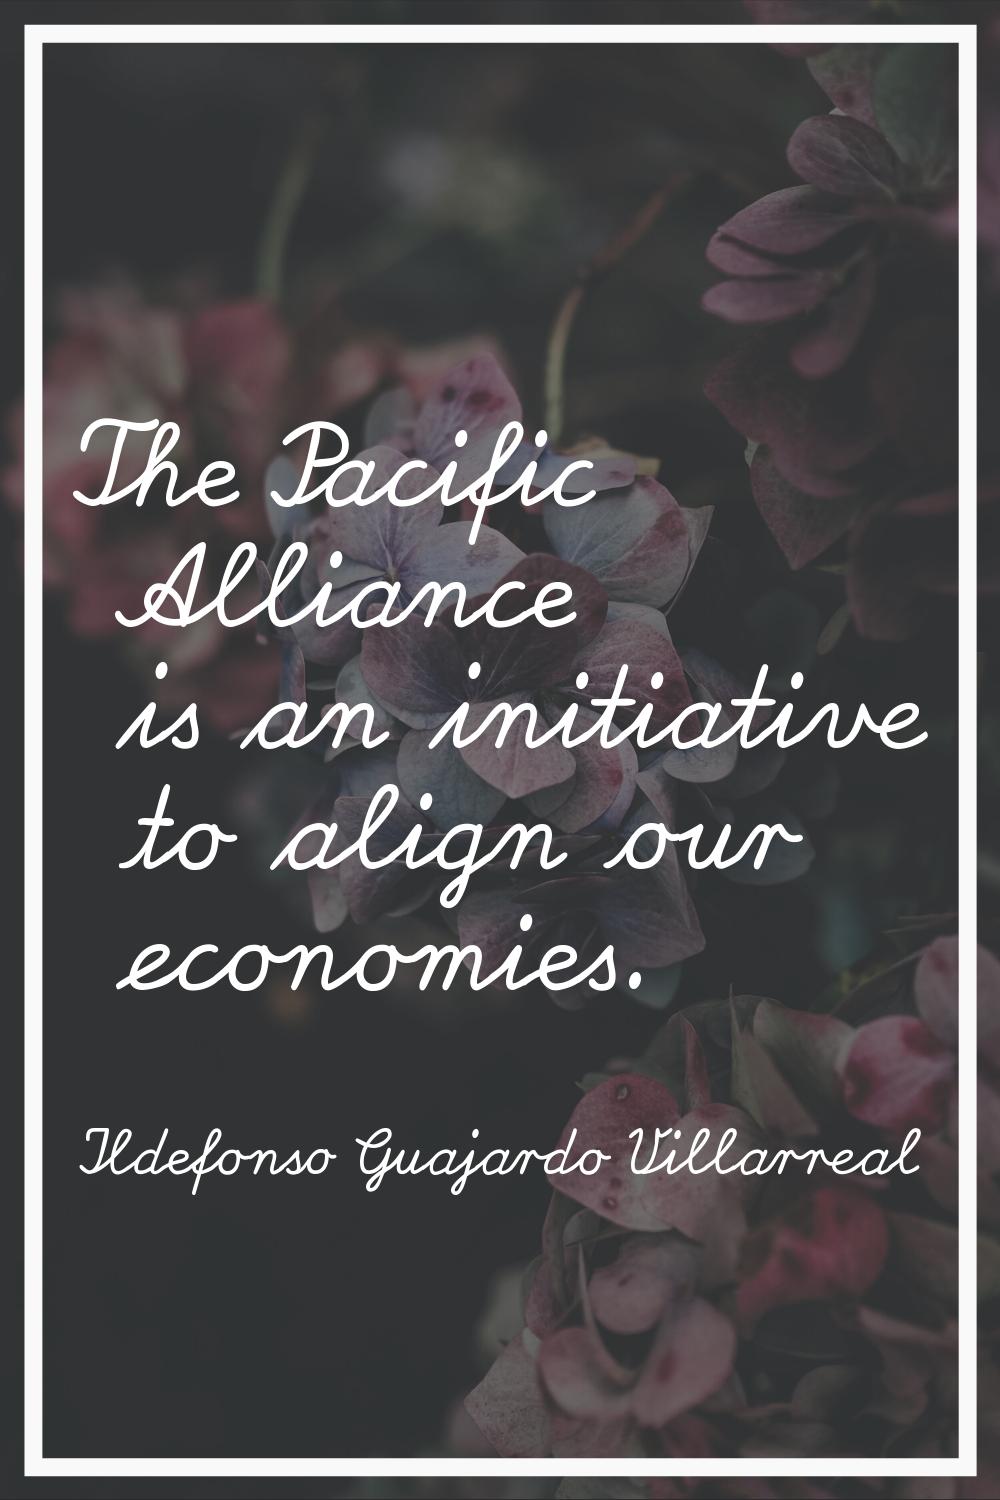 The Pacific Alliance is an initiative to align our economies.